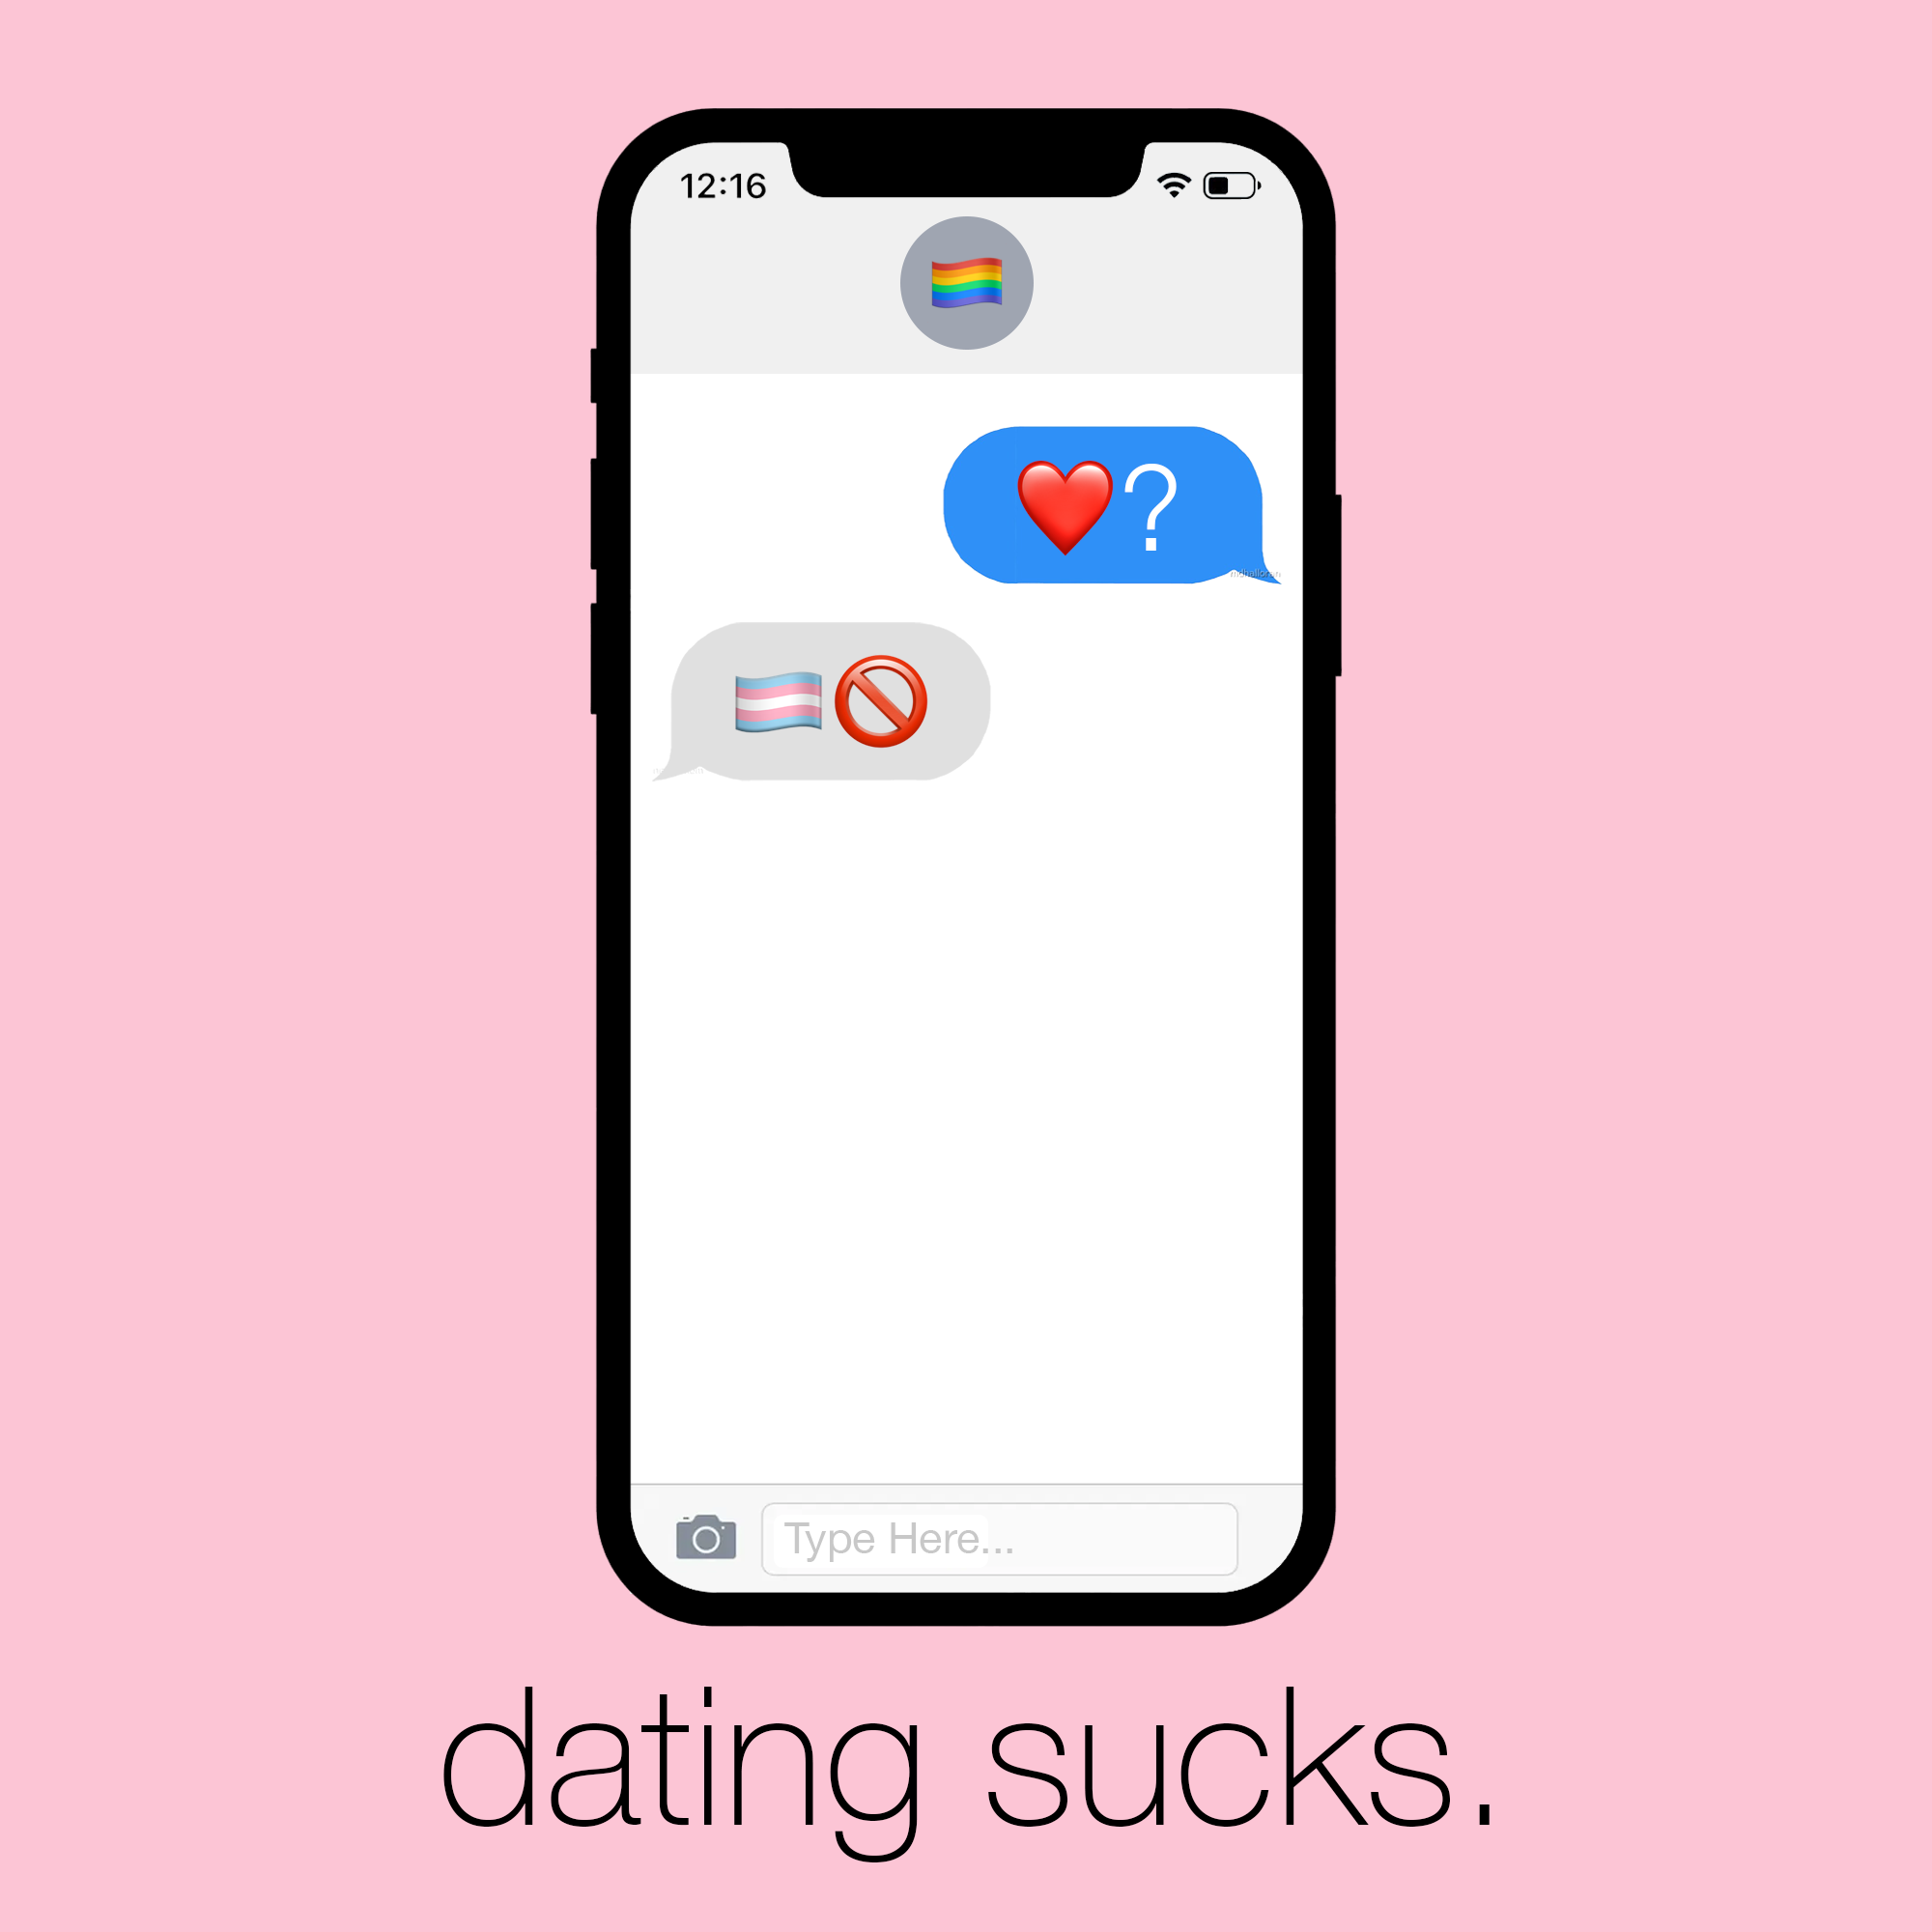 graphic showing an iPhone screen with an iMessage conversation. the sender sends a red heart and question mark, the recipient represented by the rainbow flag sends a trans flag with a canceled symbol. below the phone reads "dating sucks" on a pink background